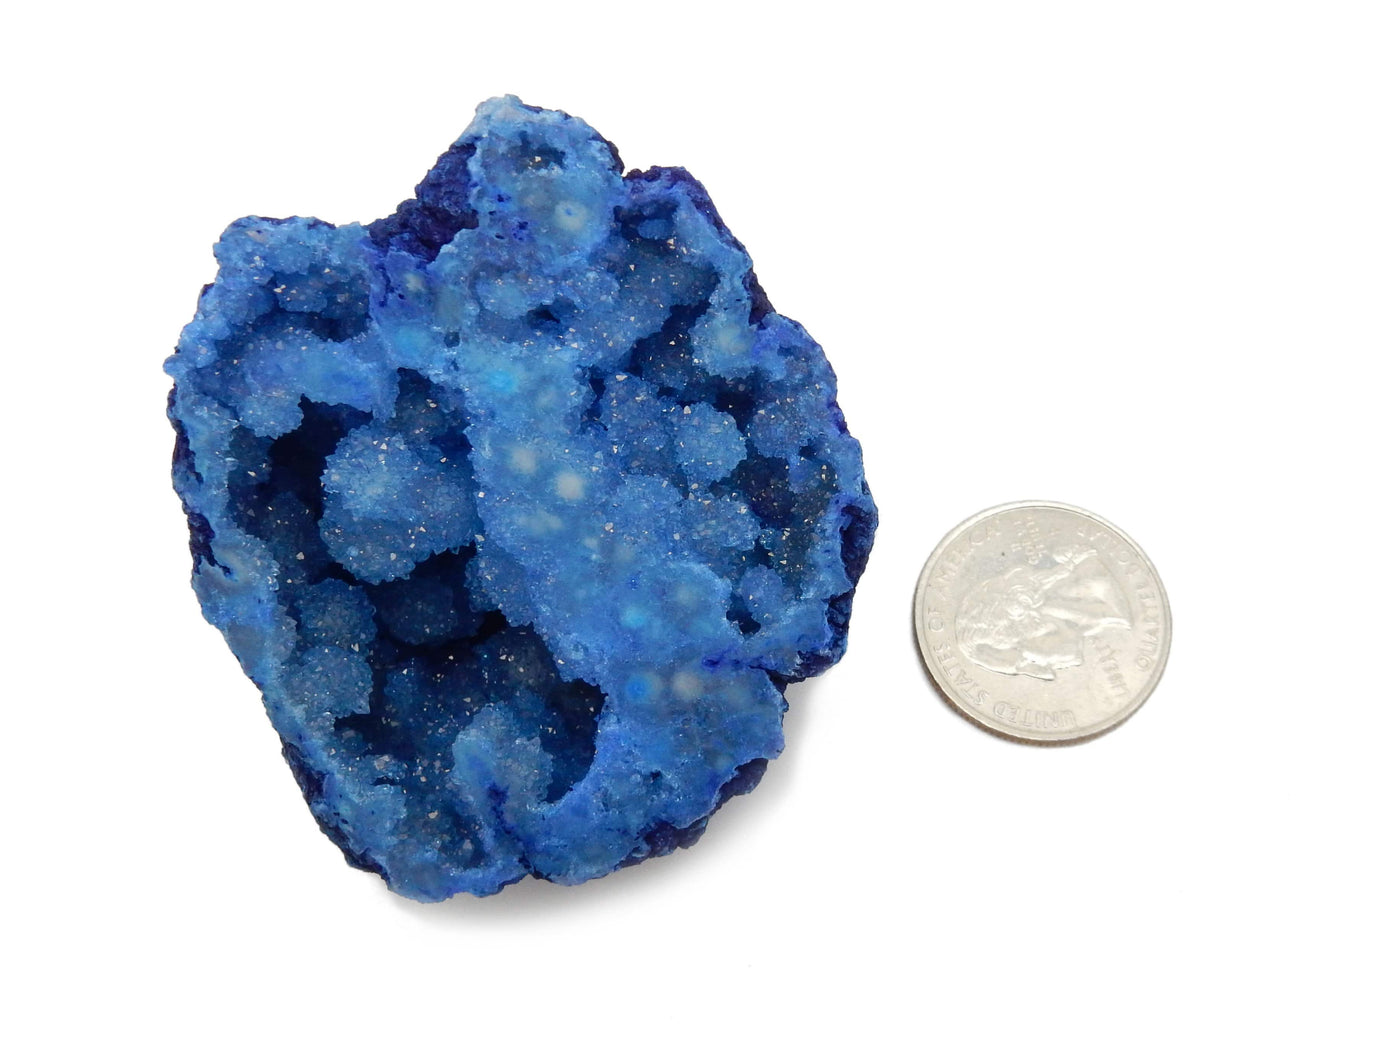 a Blue Large Geode Half next to a quarter for size